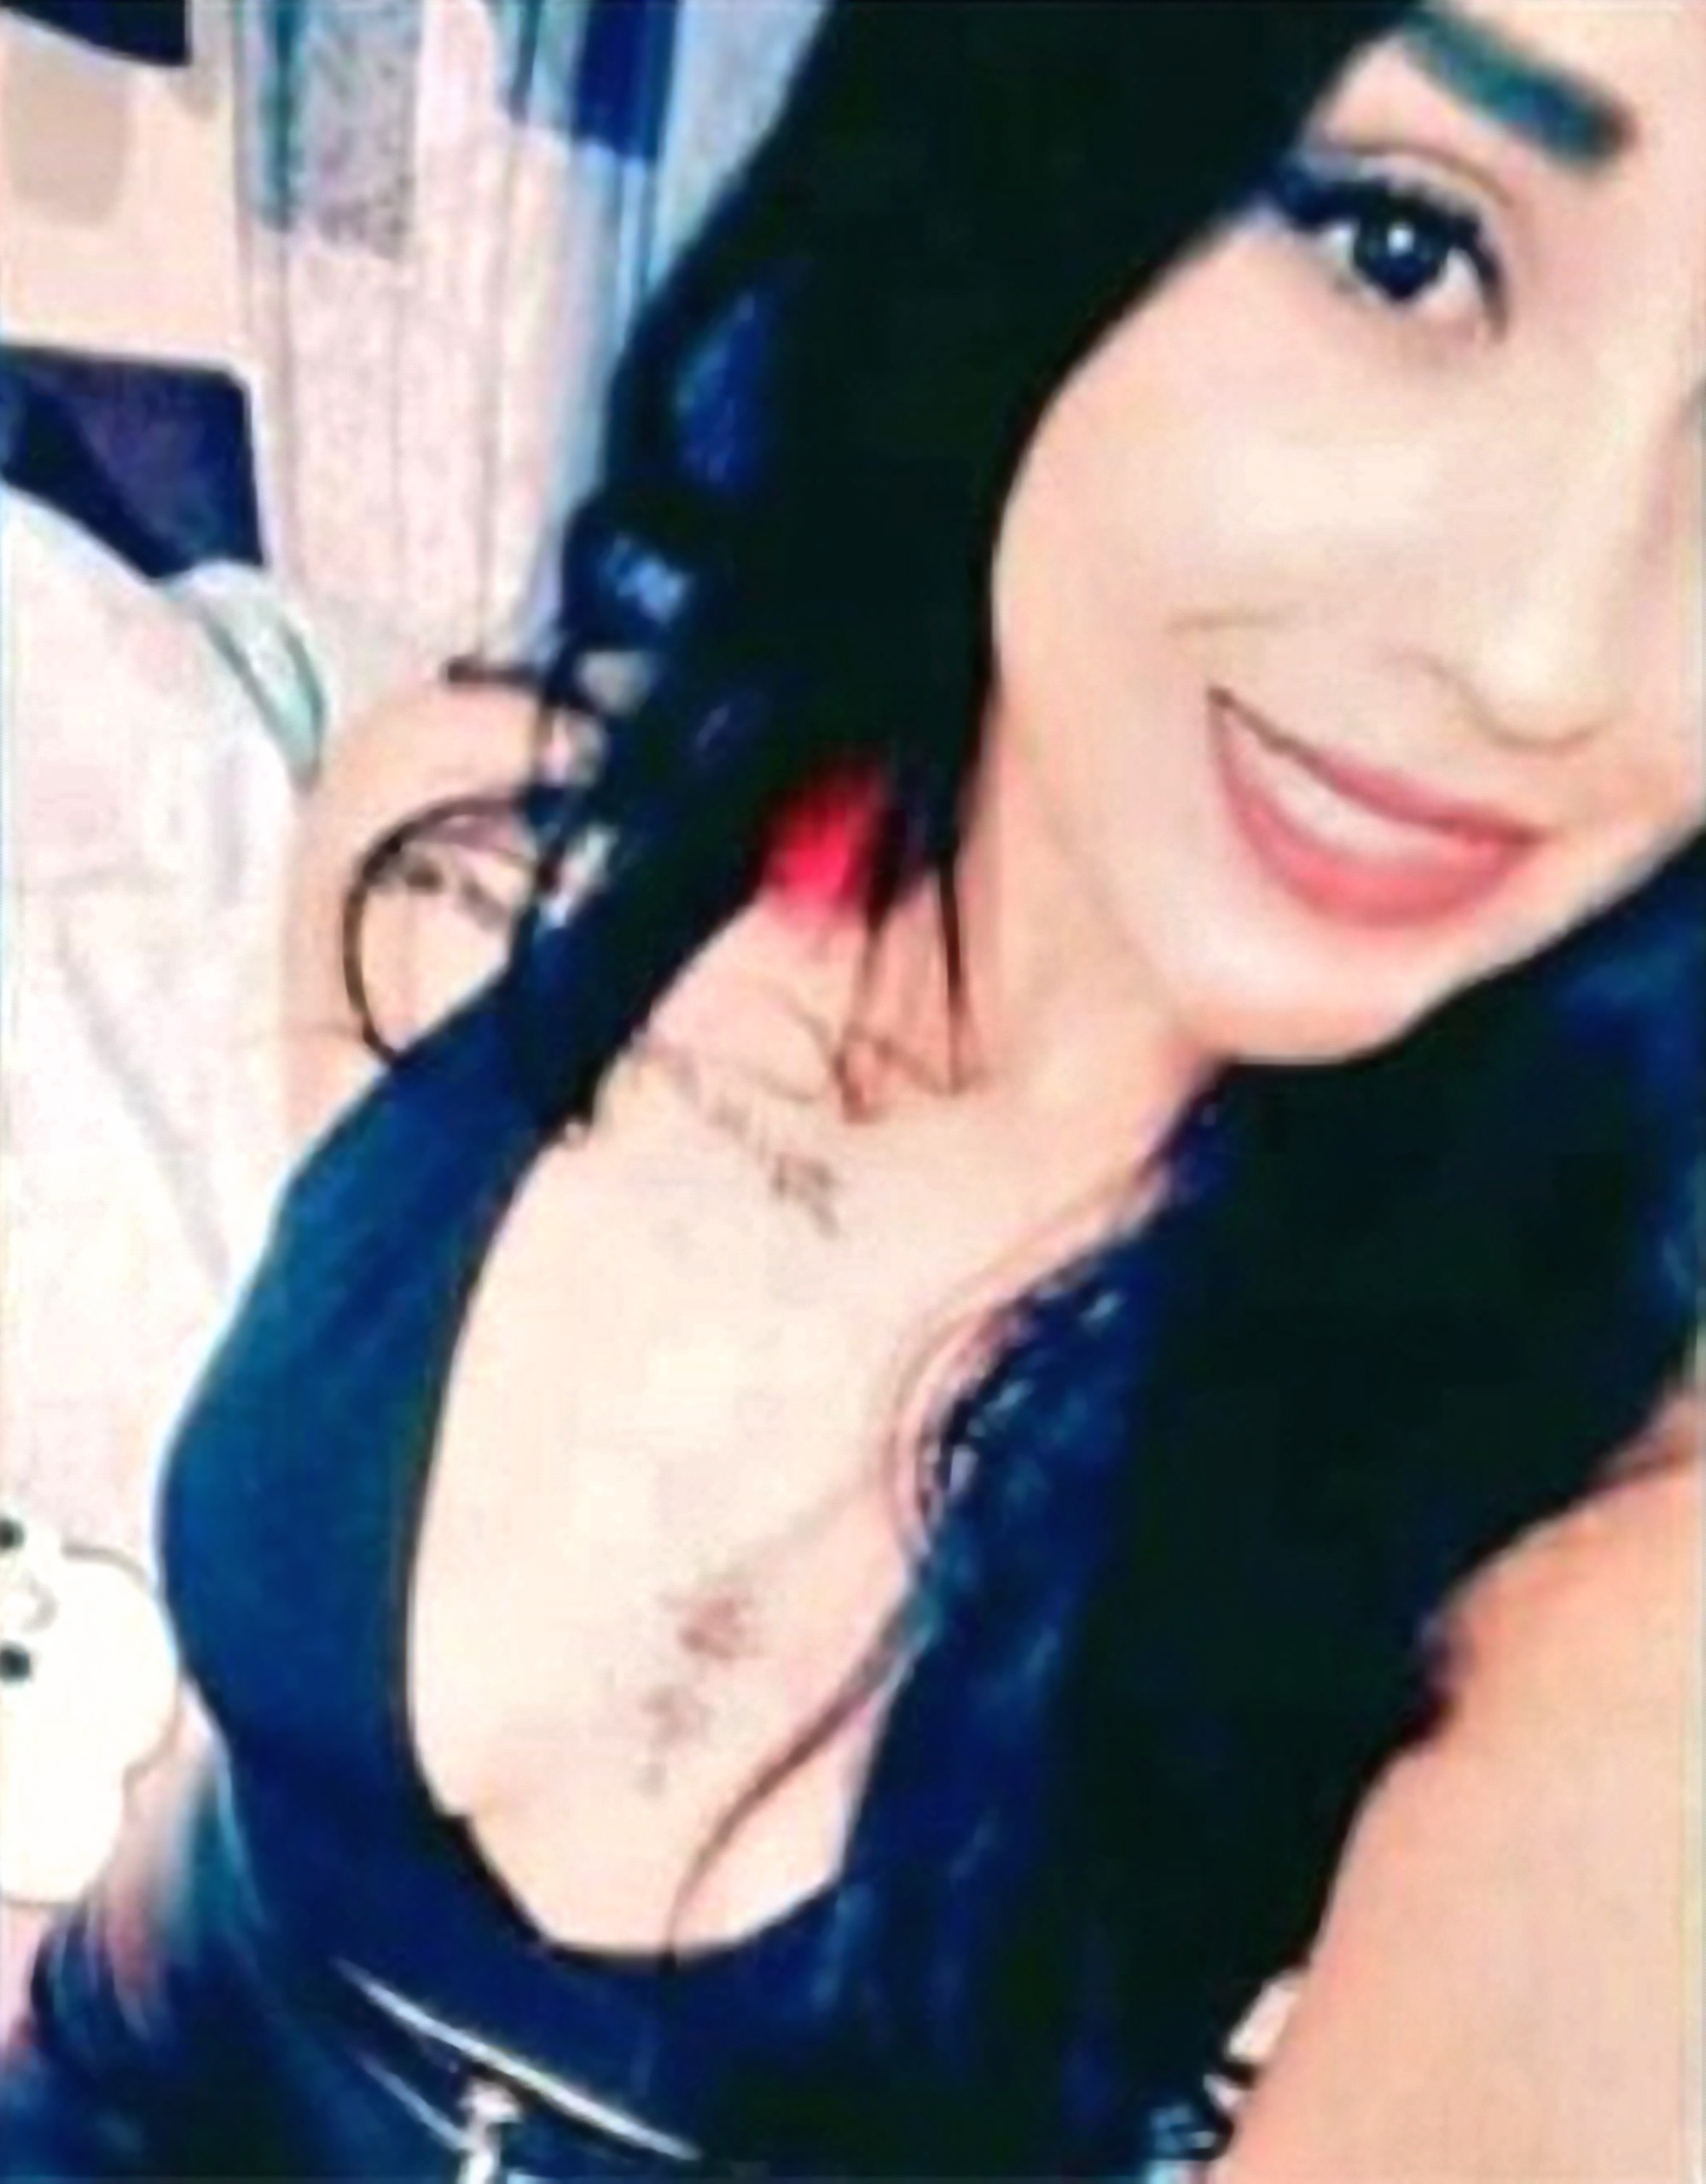 Read more about the article Pregnant Woman Dismembered By Boyfriend On Orders Of Another Girlfriend